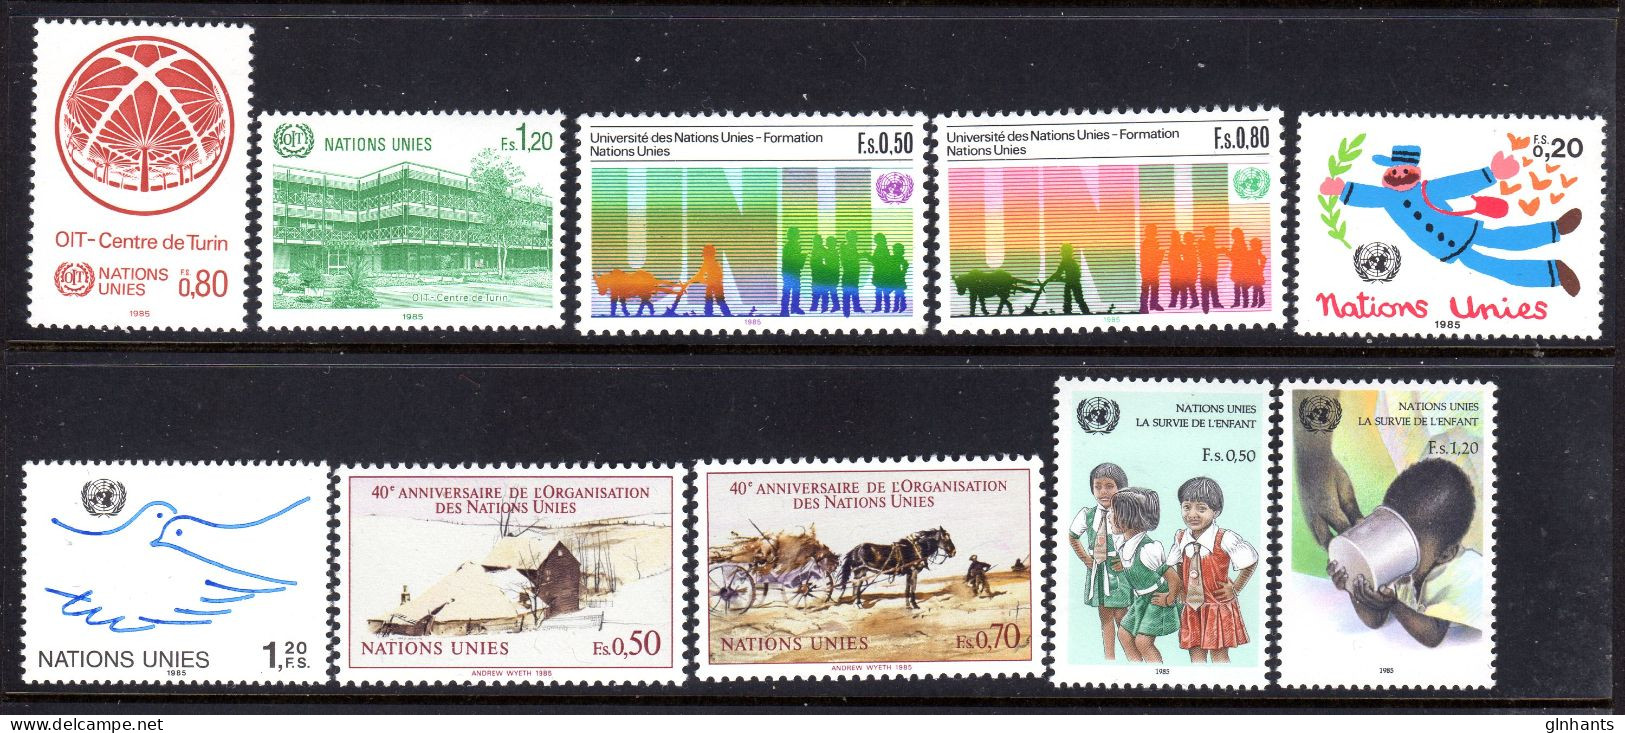 UNITED NATIONS UN GENEVA - 1985 COMPLETE YEAR SET (10V) AS PICTURED FINE MNH ** SG G129-G136, G138-G139 - Nuevos